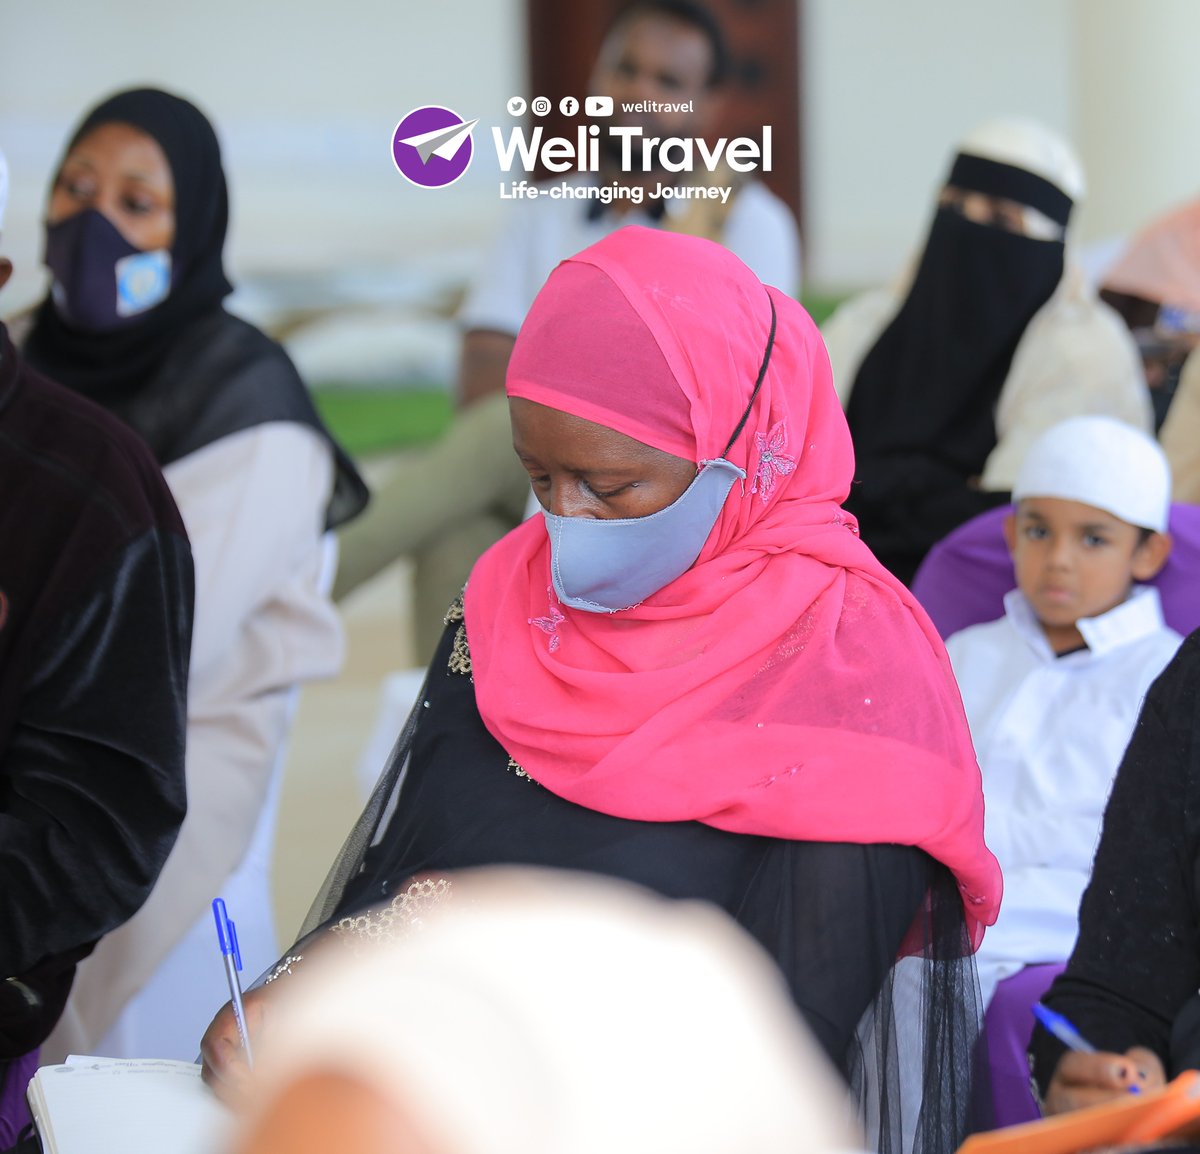 'In a hadith narrated by Our prophet SAW, he told us that anyone who performs Hajj/Umrah, Allah removes disbelief and poverty from him/her.' Sheikh Adam Ssenjala

Last Saturday's 1st Seminar of Preparing the Hujjajiz (Pilgrims) before departure.
#hajj2022 #HajjSeminar  #Uganda